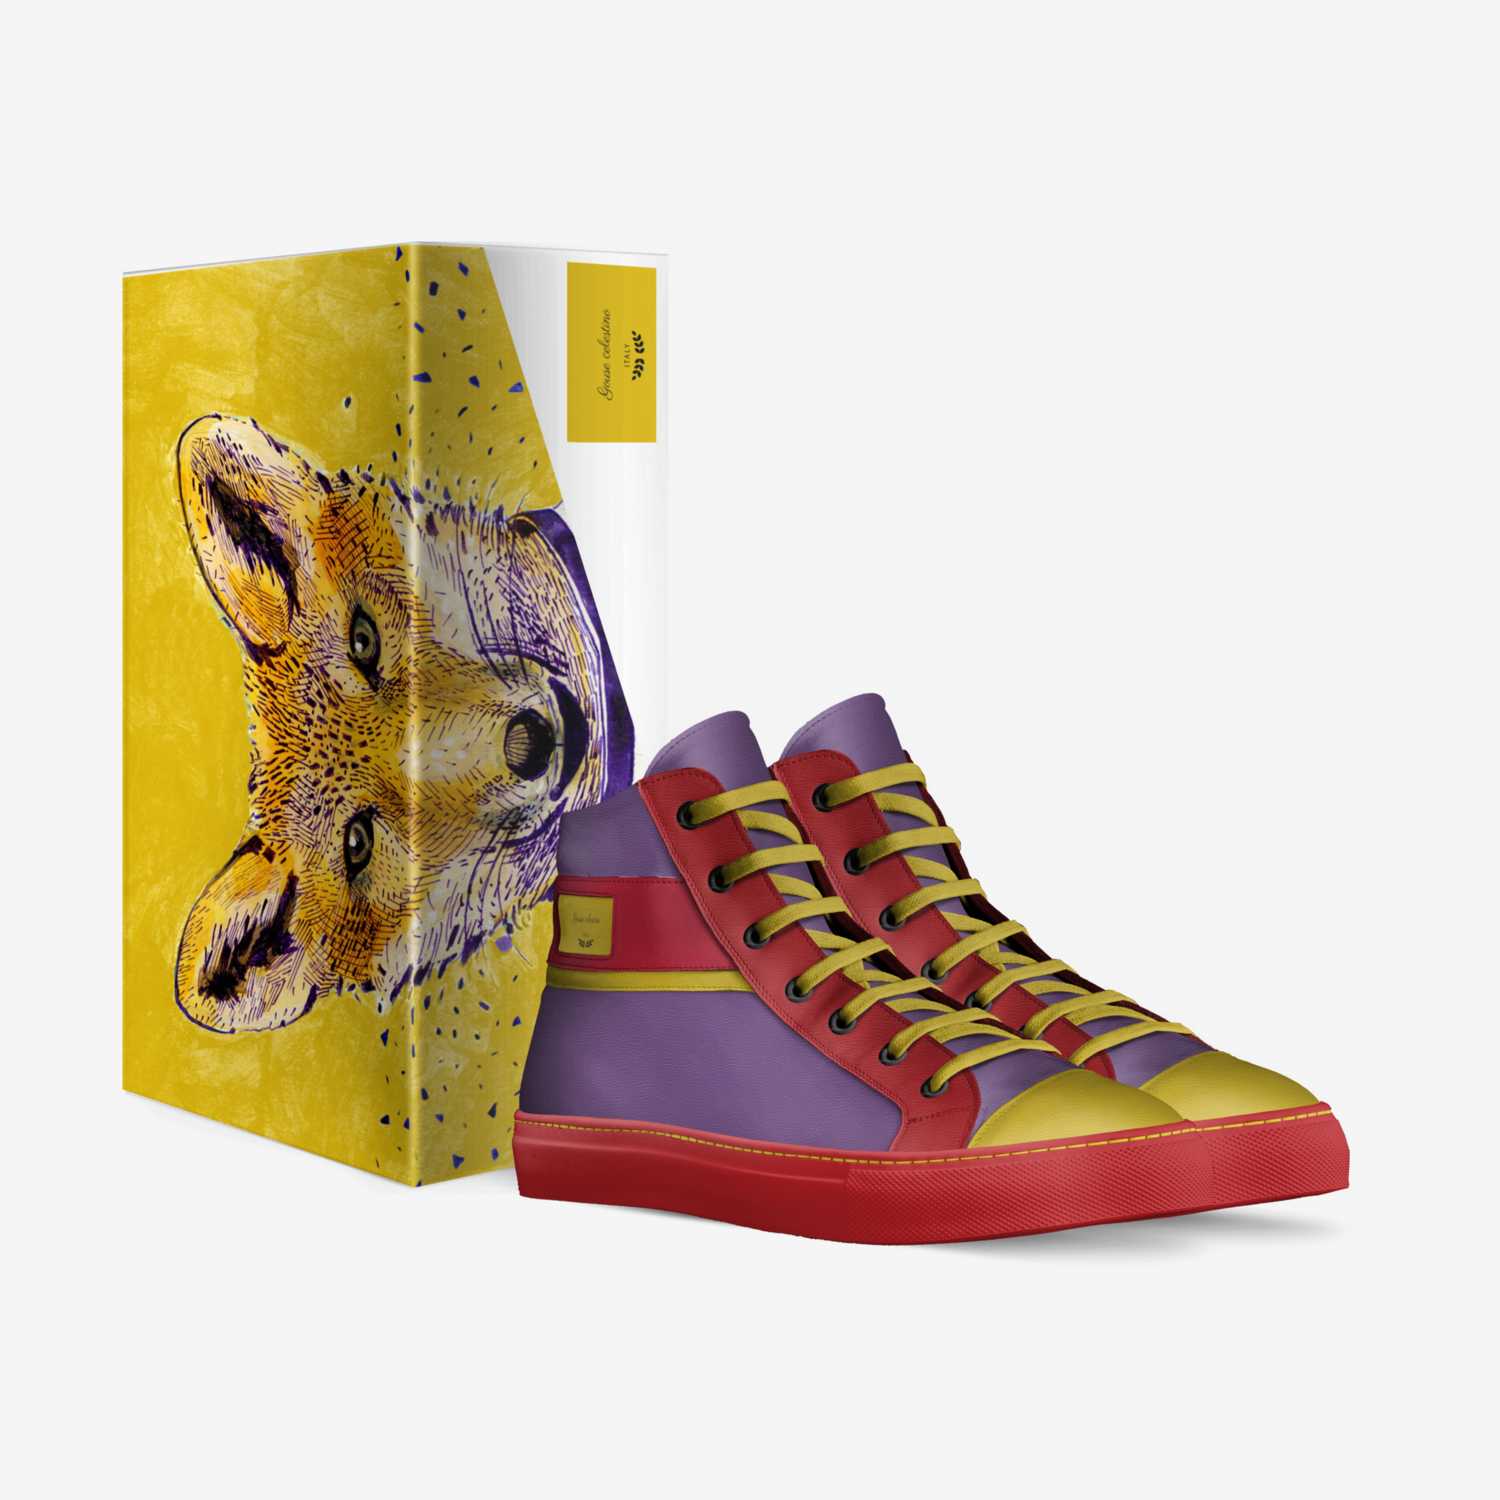 Gouse celestino custom made in Italy shoes by Nick Celestin | Box view